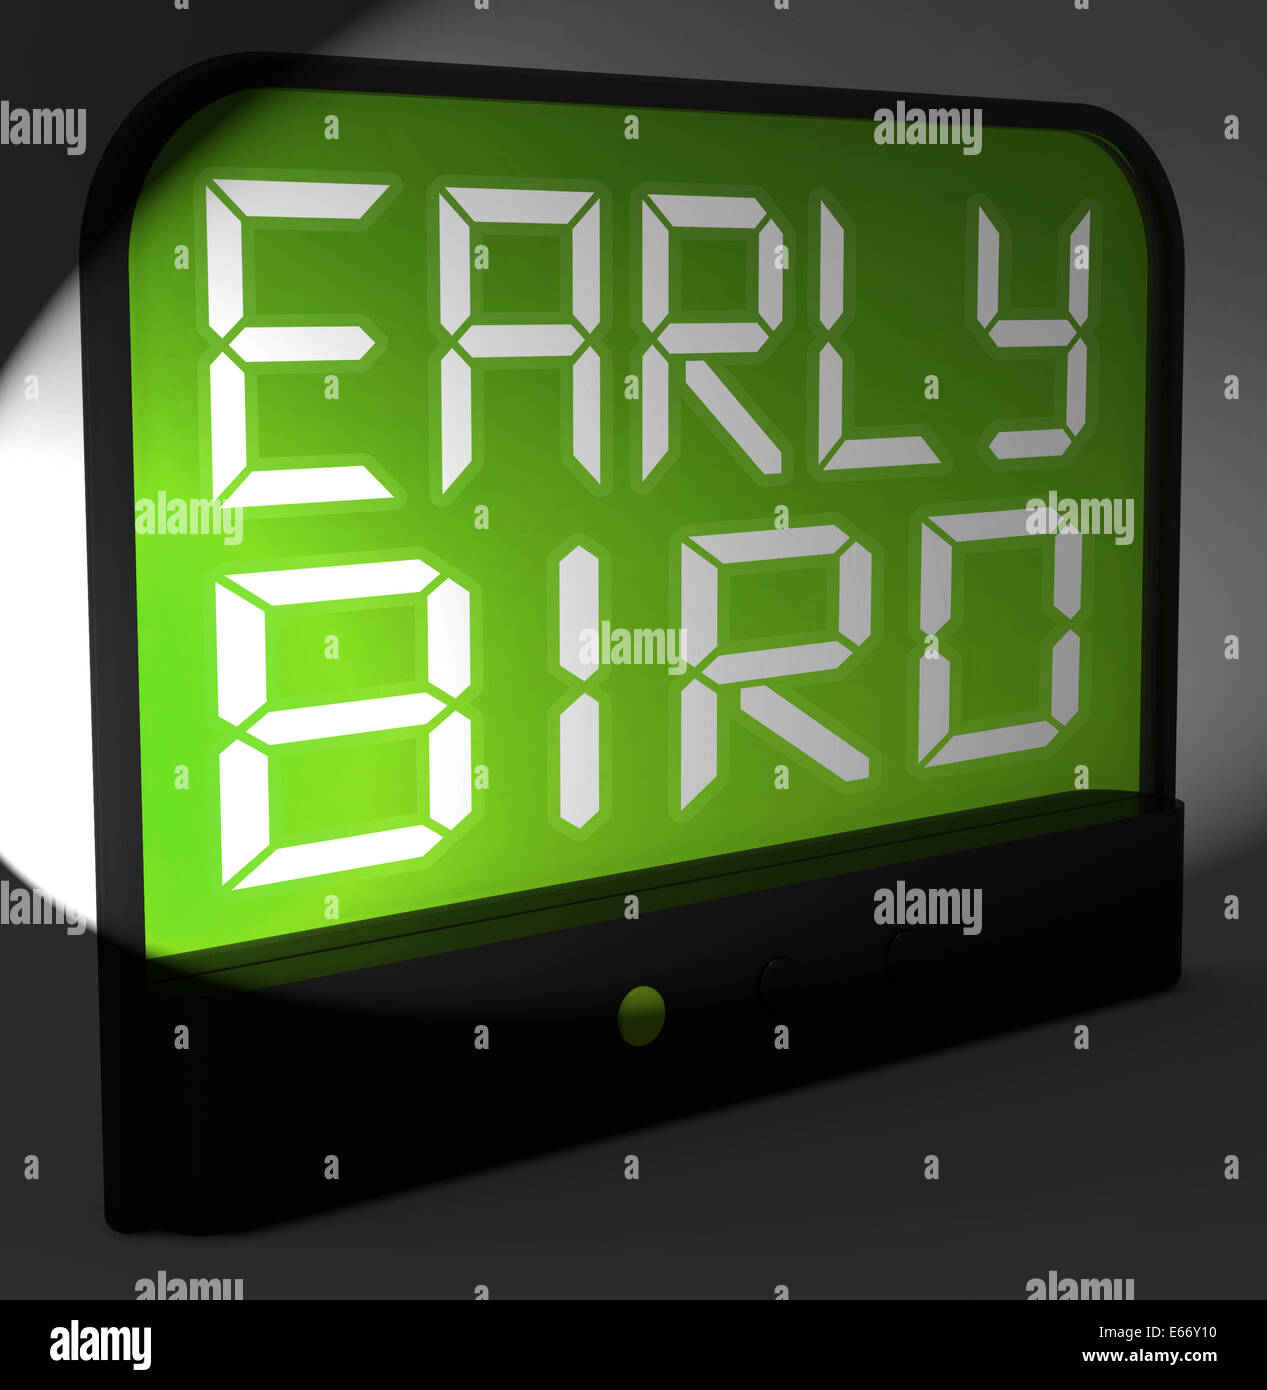 Early Bird Digital Clock Showing Punctuality Or Ahead Of Schedule Stock Photo